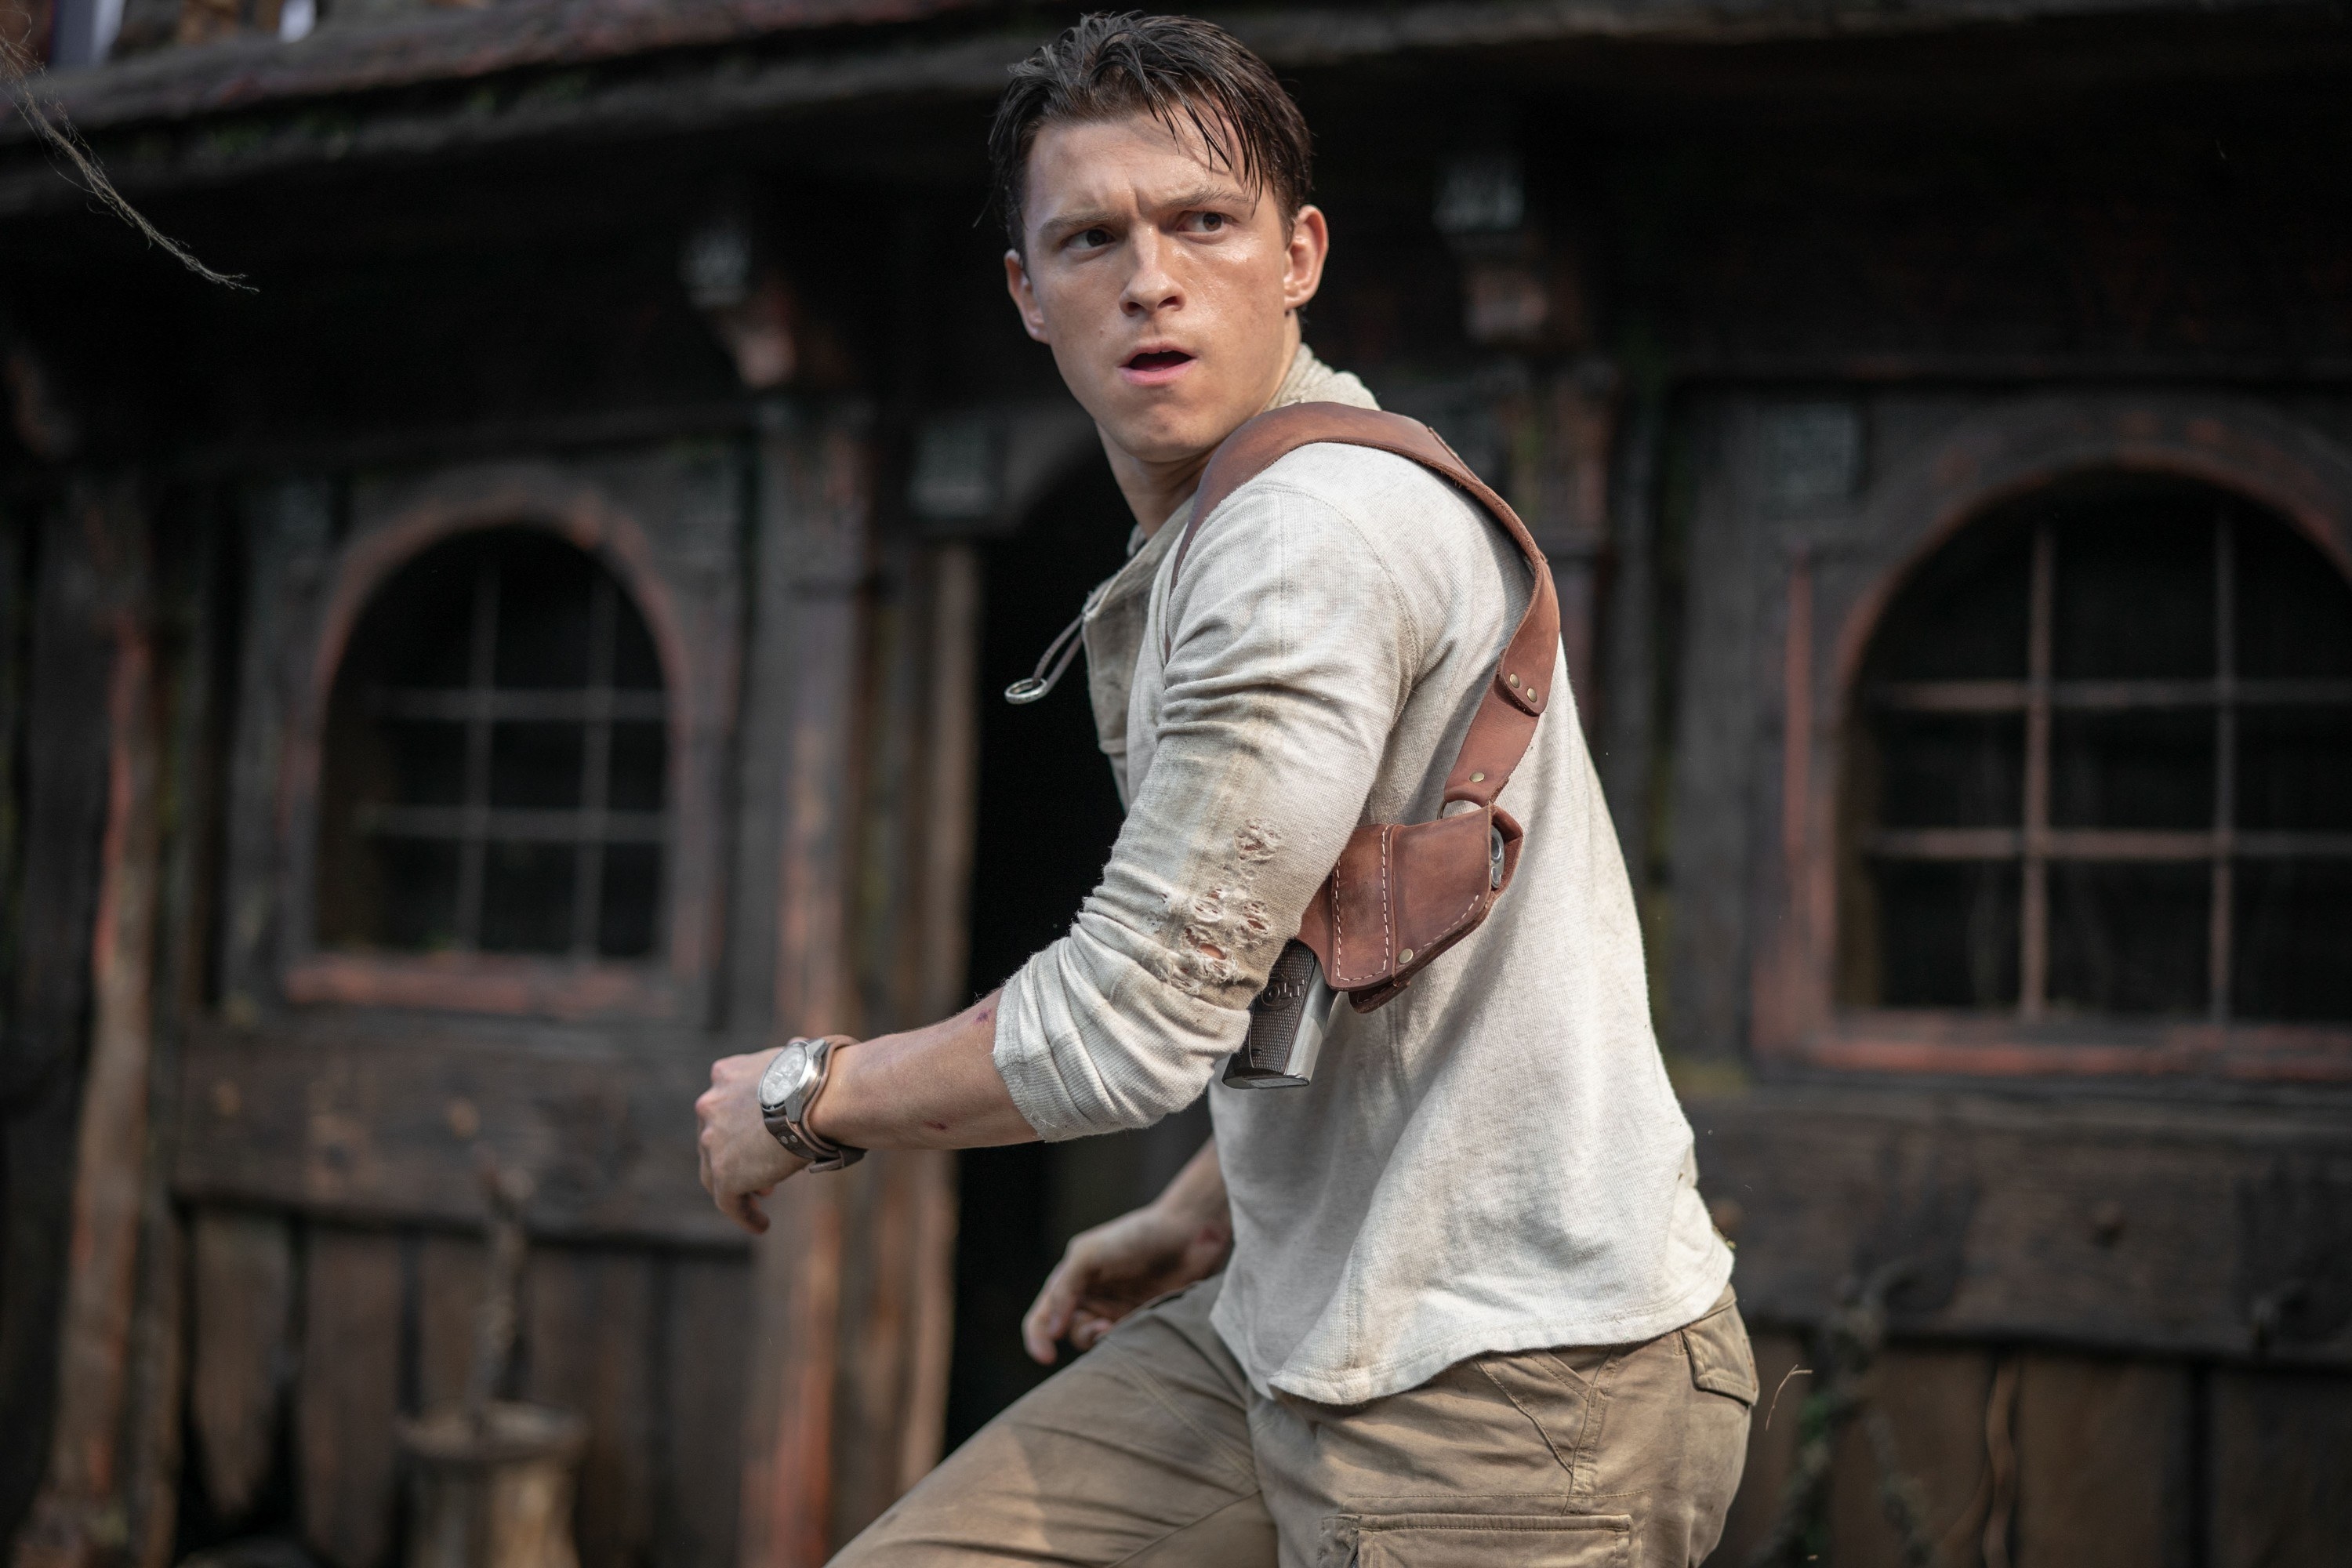 Tom looks serious while running in the movie